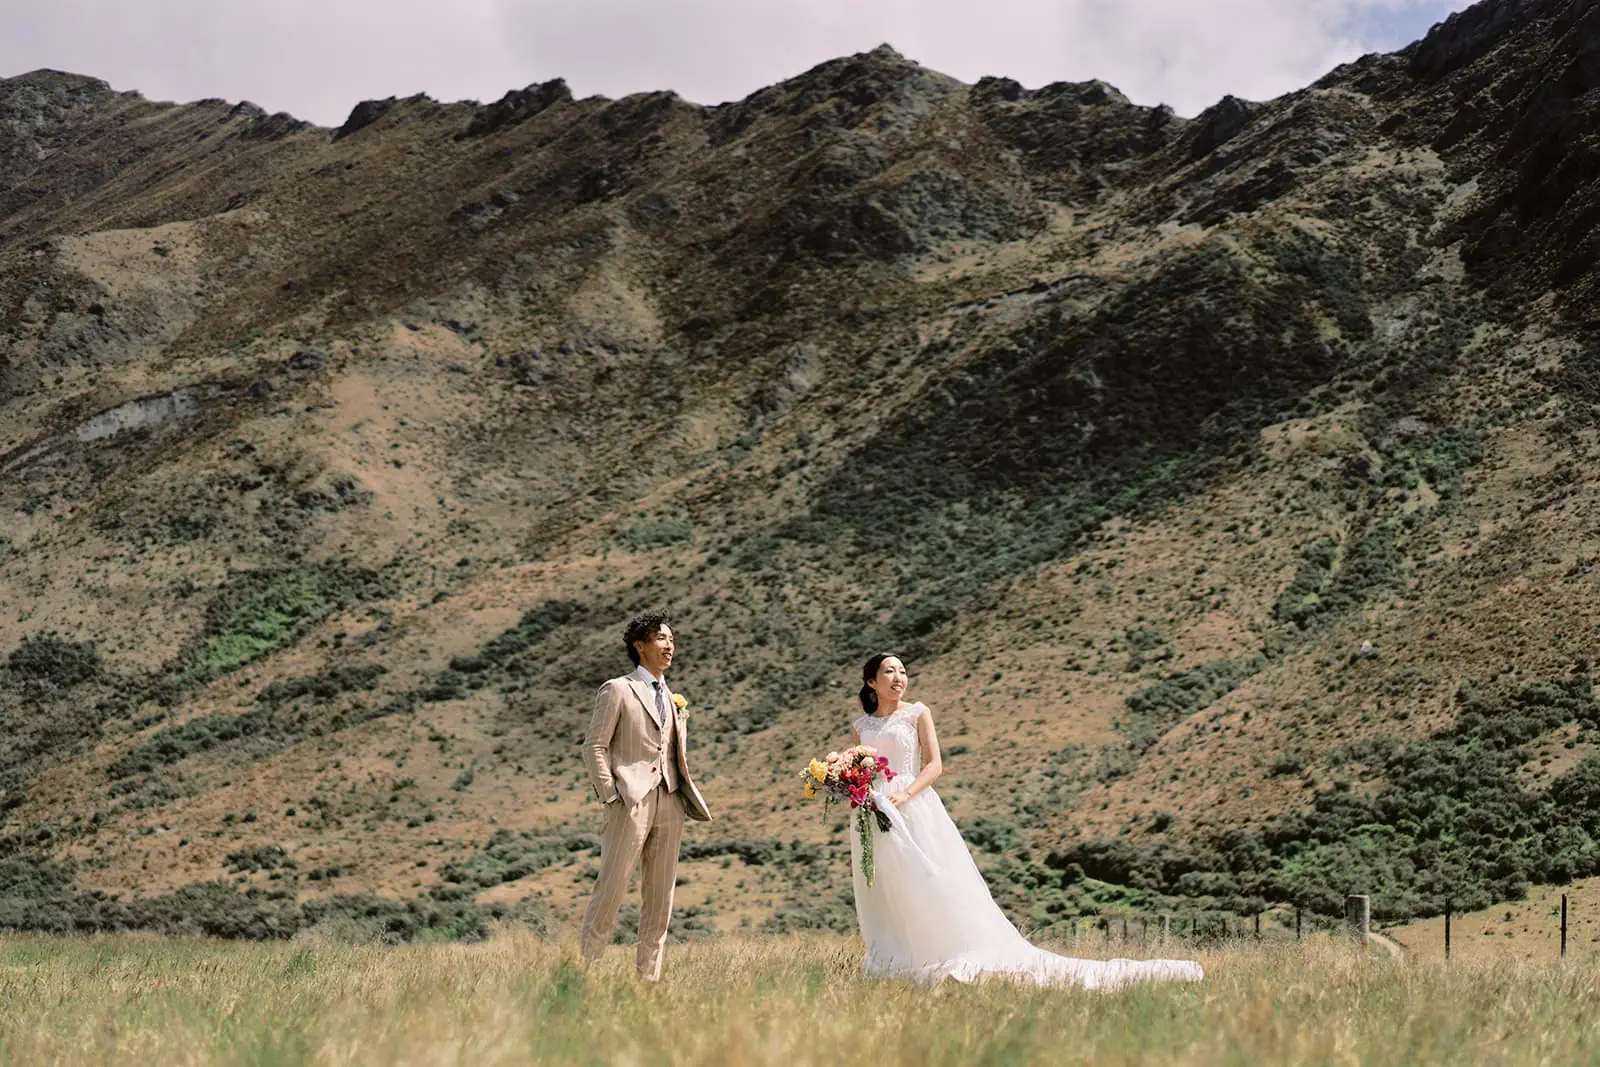 Queenstown Elopement Heli Wedding Photographer クイーンズタウン結婚式 | Saki and Taisei, a bride and groom, standing in a field with mountains in the background near Queenstown.